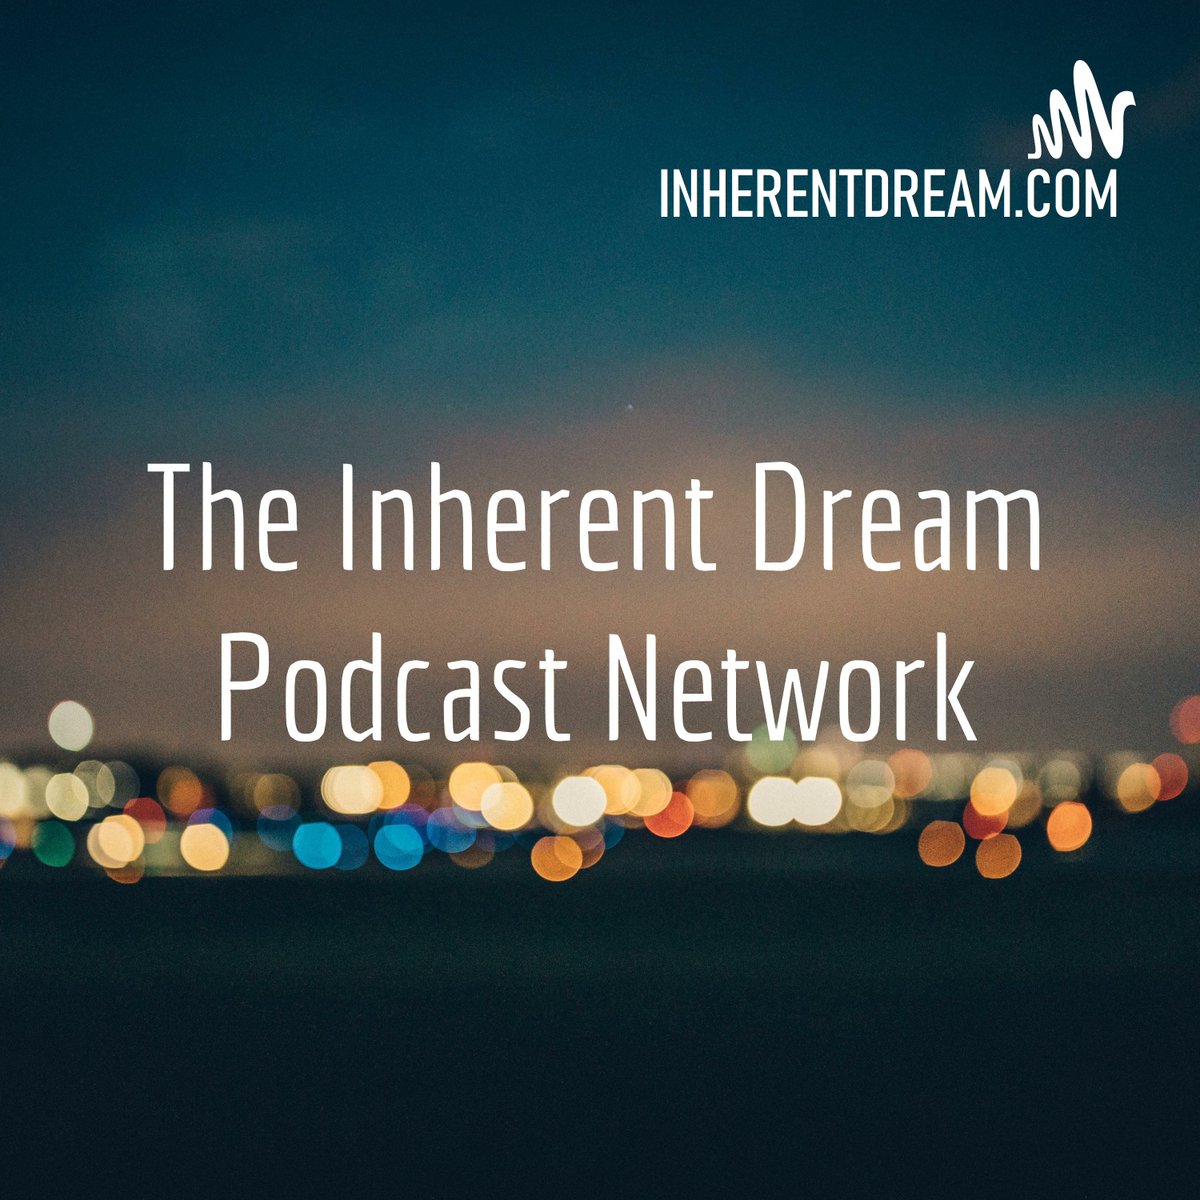 All of our content. All on one channel. EASY. Including The Trevor J. Brown Show and 763 The Local!

https://t.co/nXajpK34VG
#podcasts #inherentdream #minnesota #news #weather #information #interviews https://t.co/WqoMDznpof